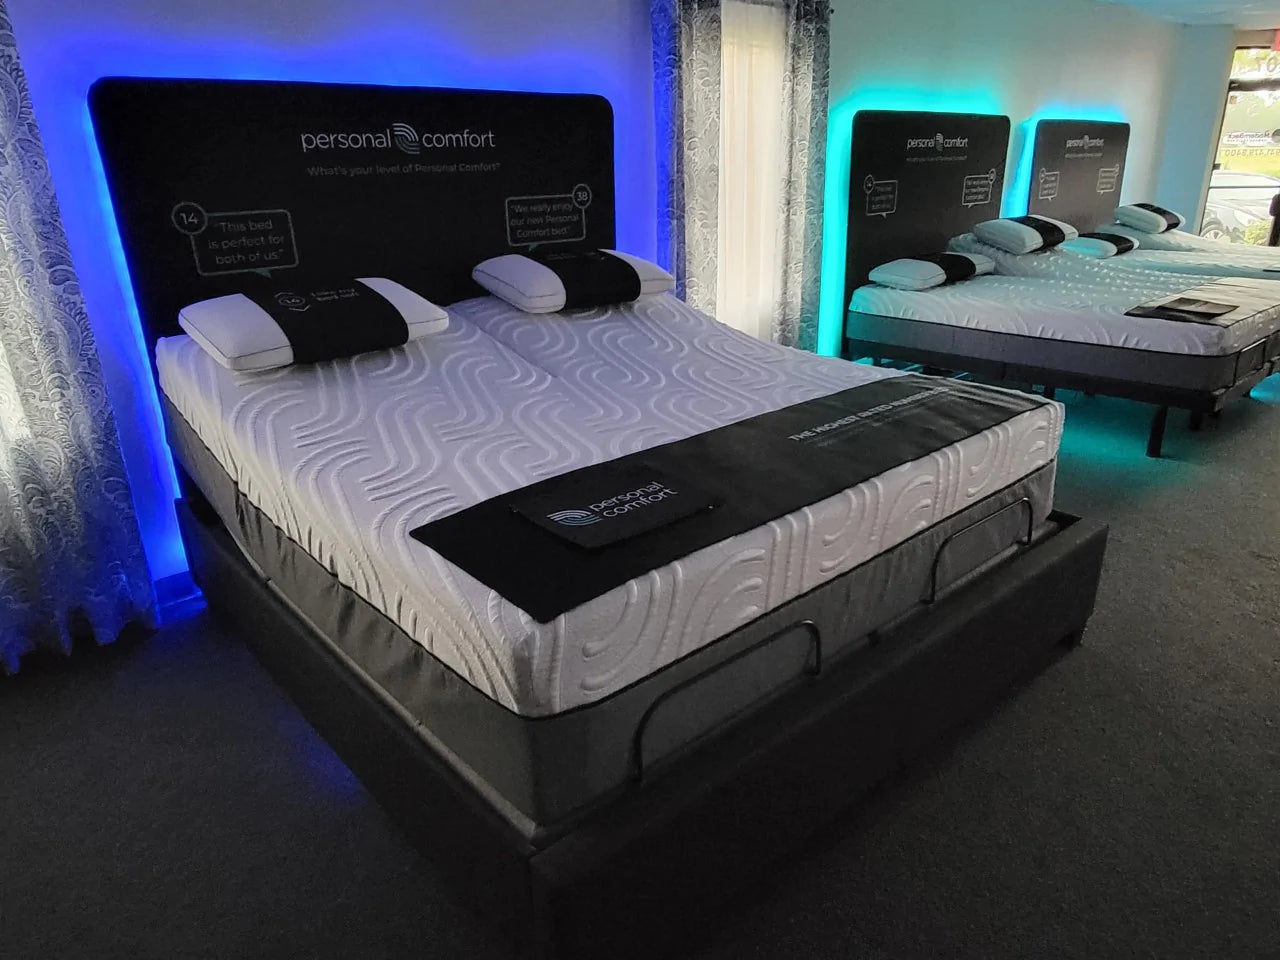 With Personal Comfort Number Beds you can personalize your own level of comfort for the best night's sleep of your life. 